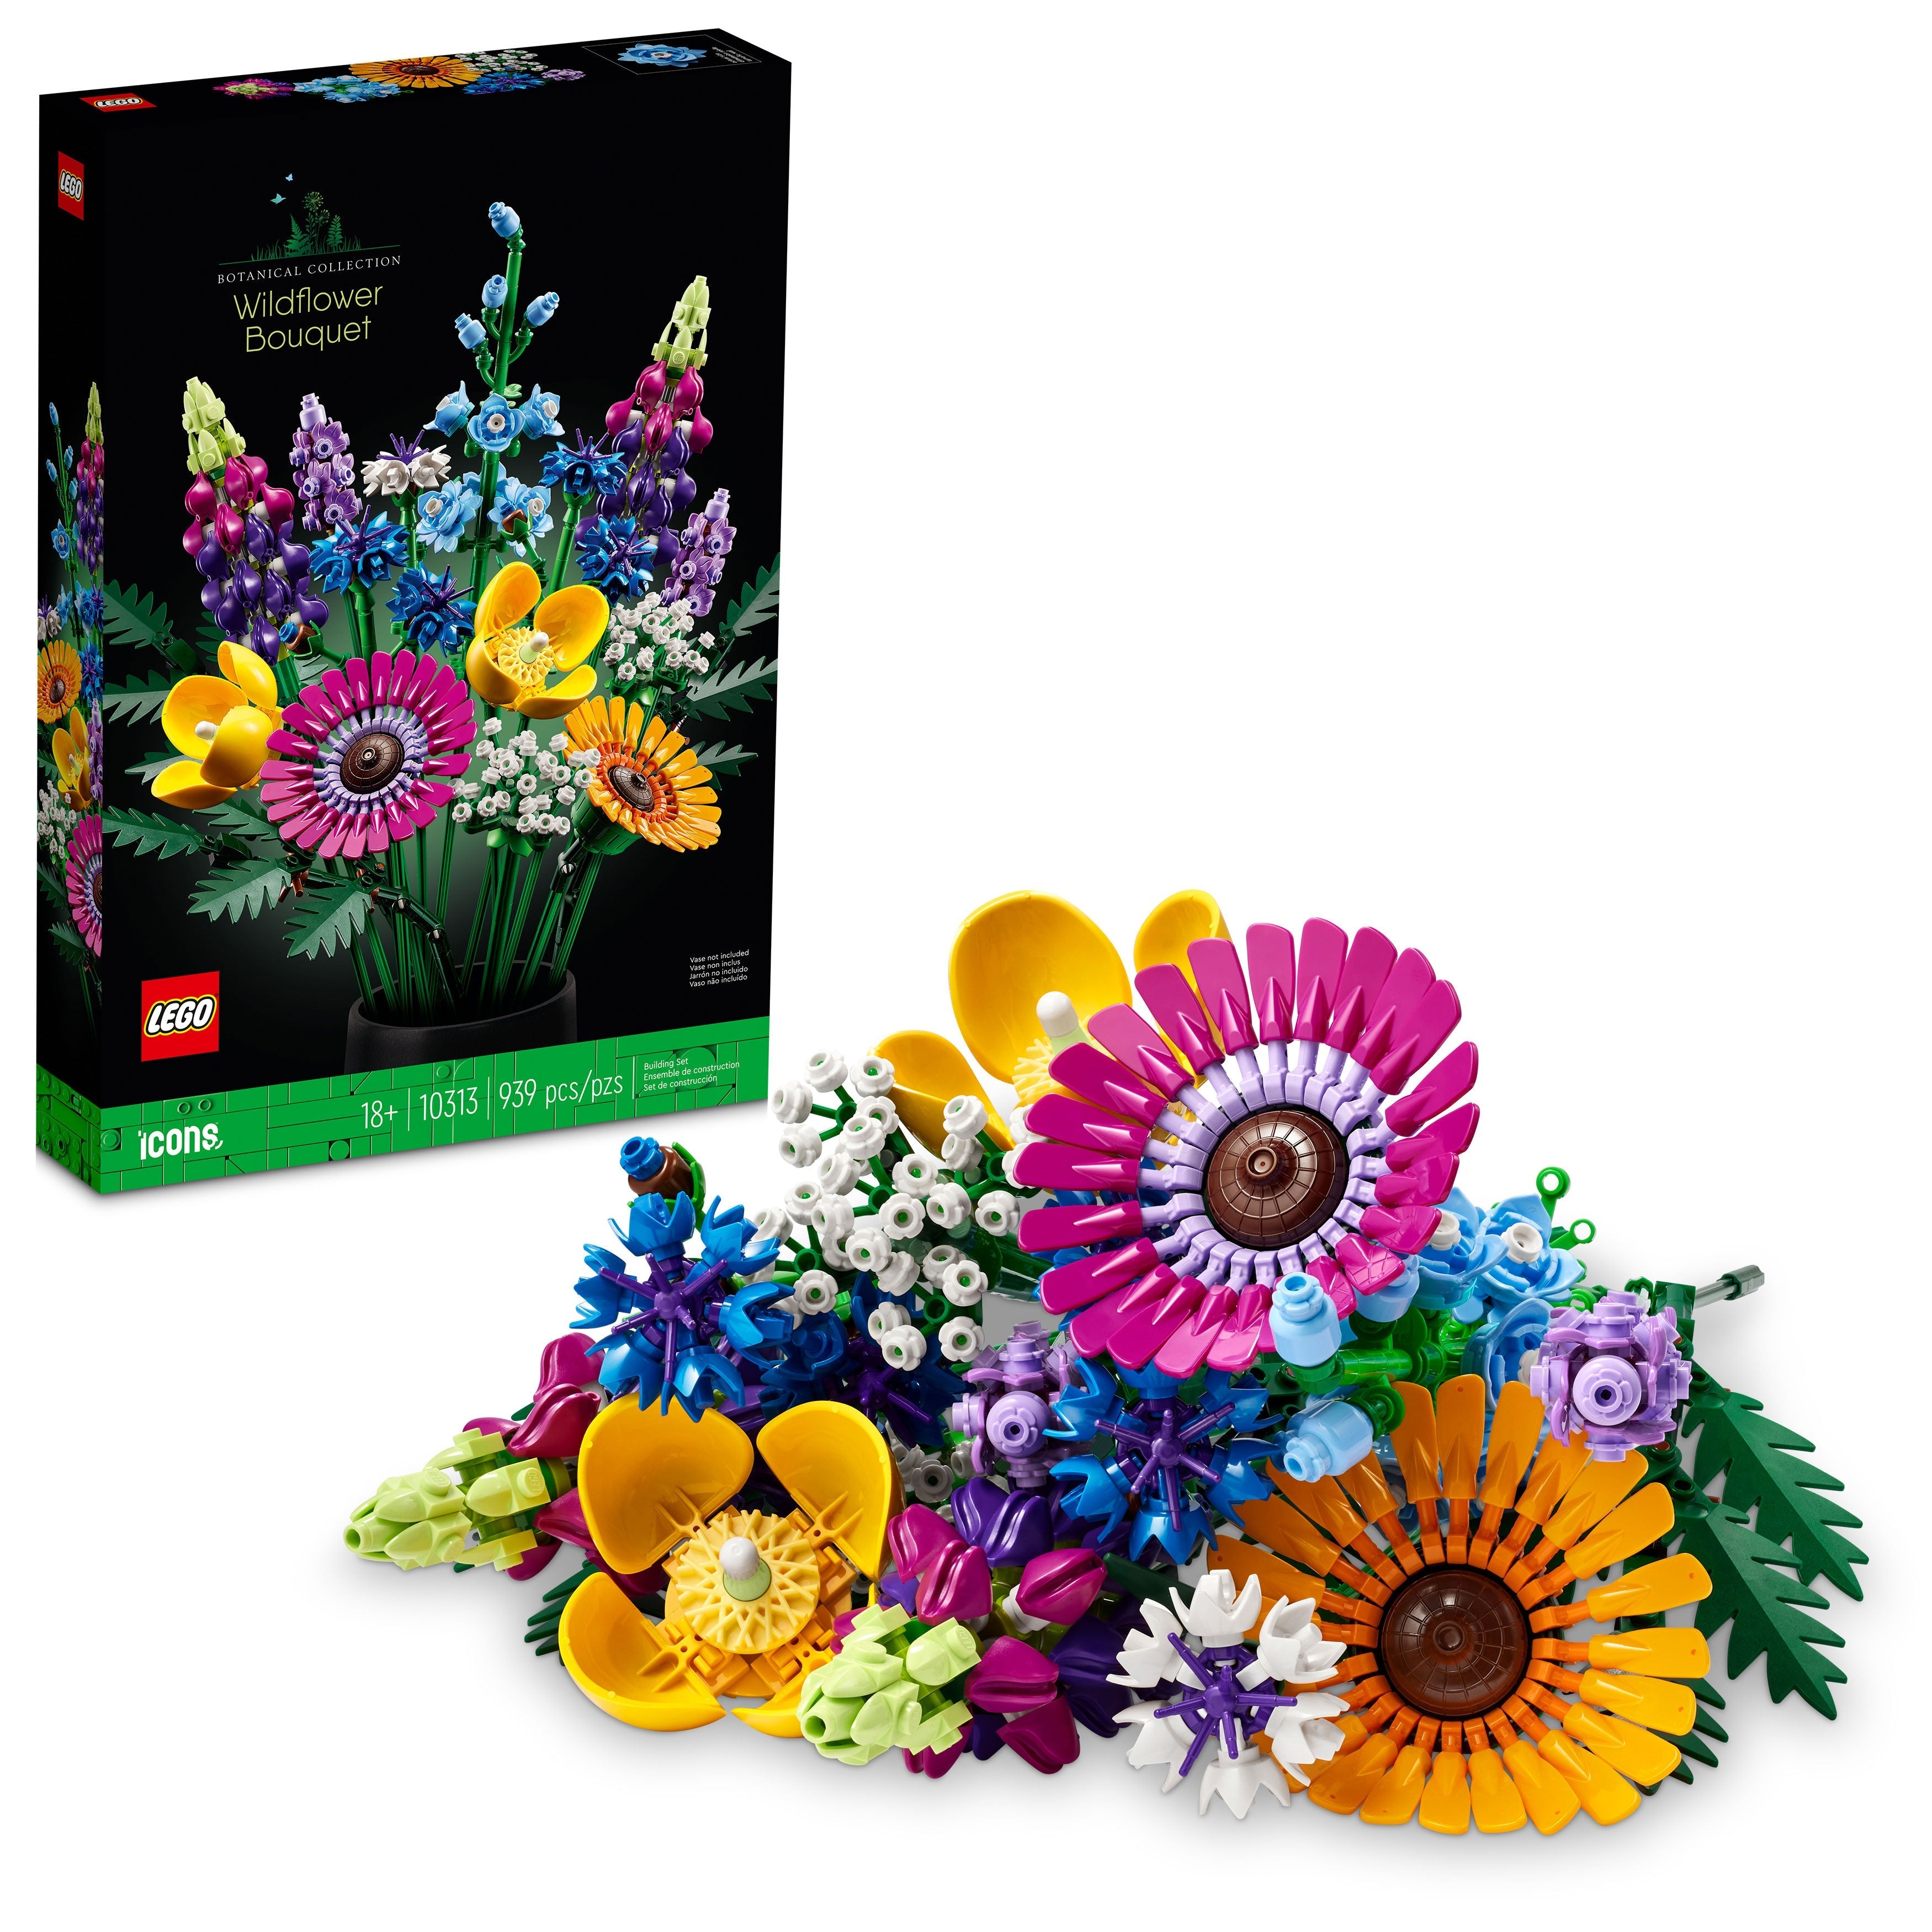 LEGO Icons Wildflower Bouquet, 10313, Ages 18+, 939 Pieces